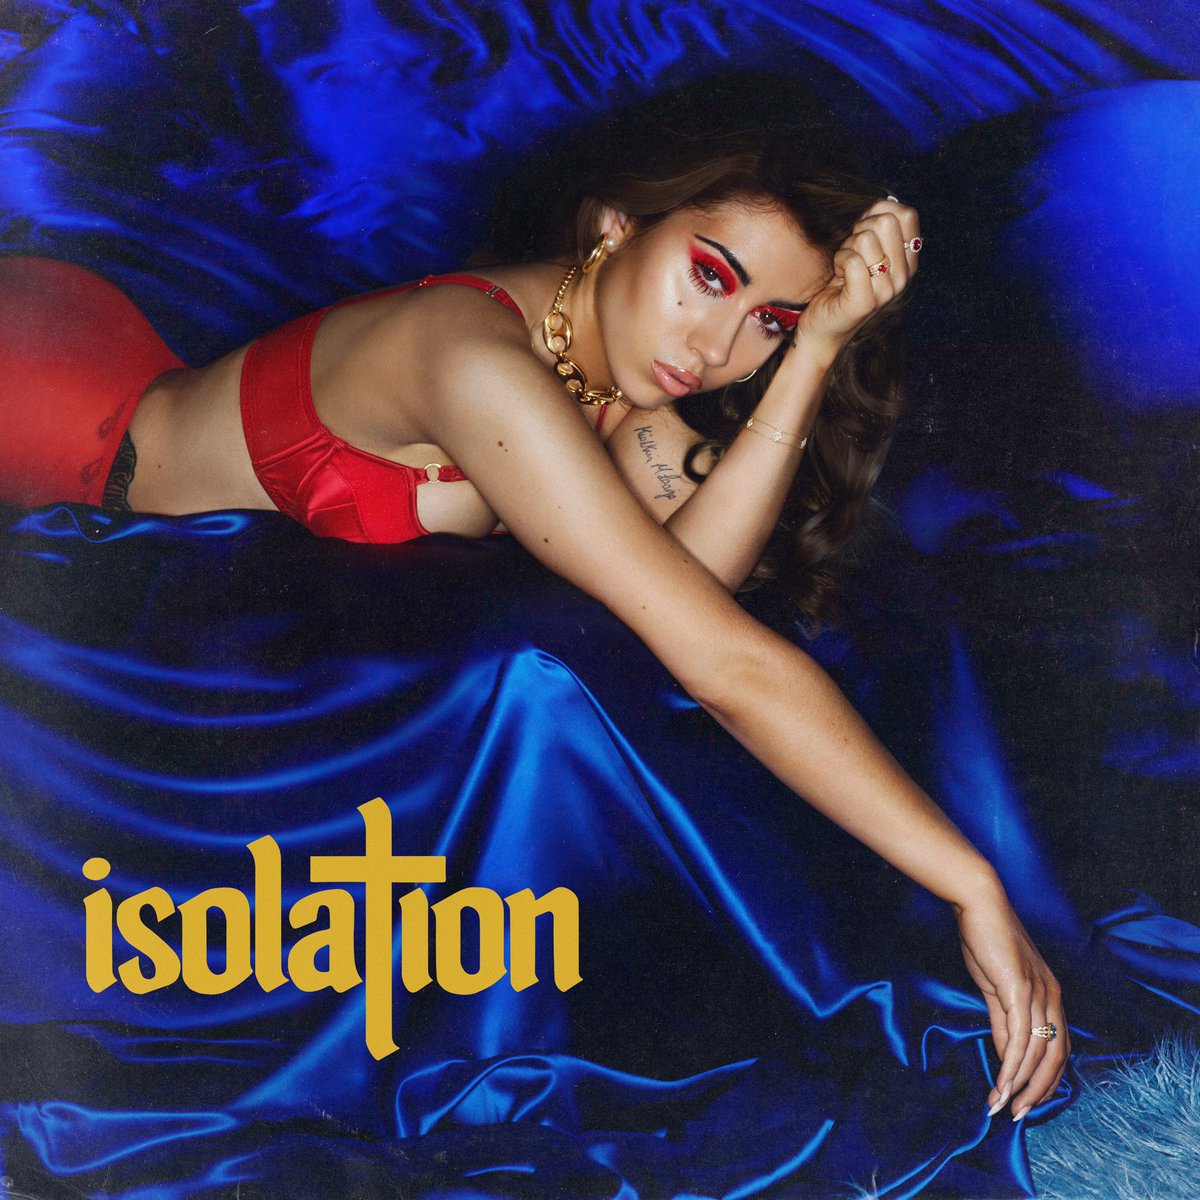 Northern Transmissions' review of 'Isolation' by Kali Uchis